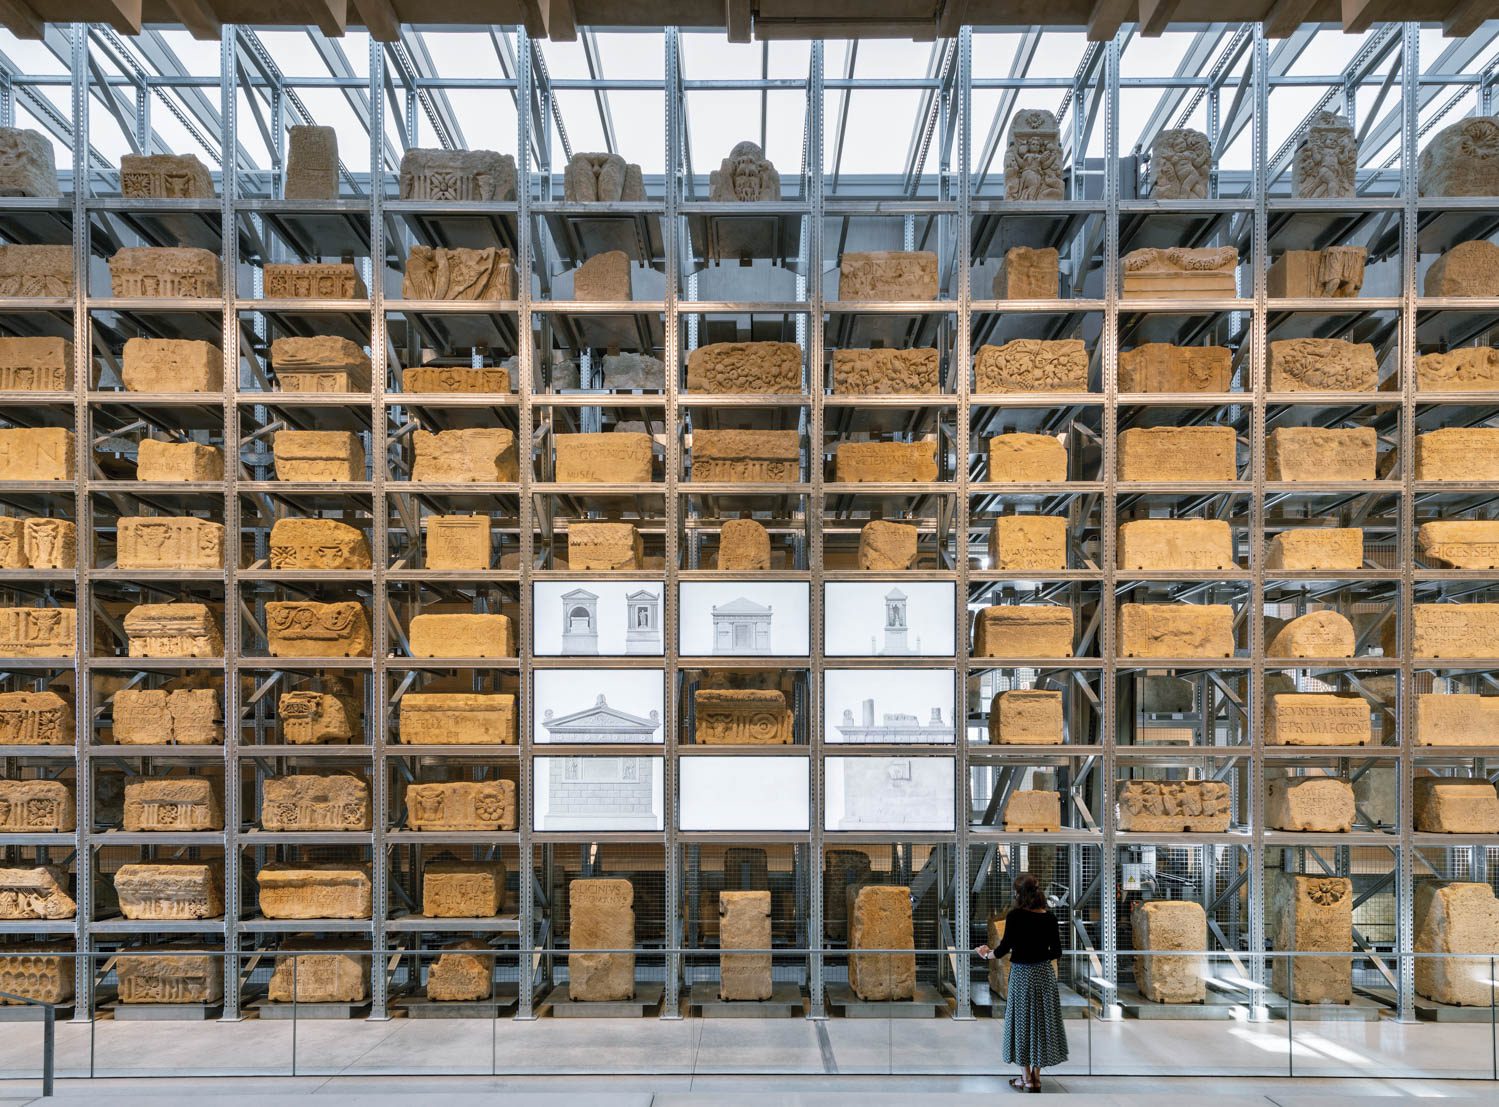 More than 800 Roman funerary stones are displayed in a custom industrial shelving system at the Narbo Via Museum in Narbonne, France, by Foster + Partners.